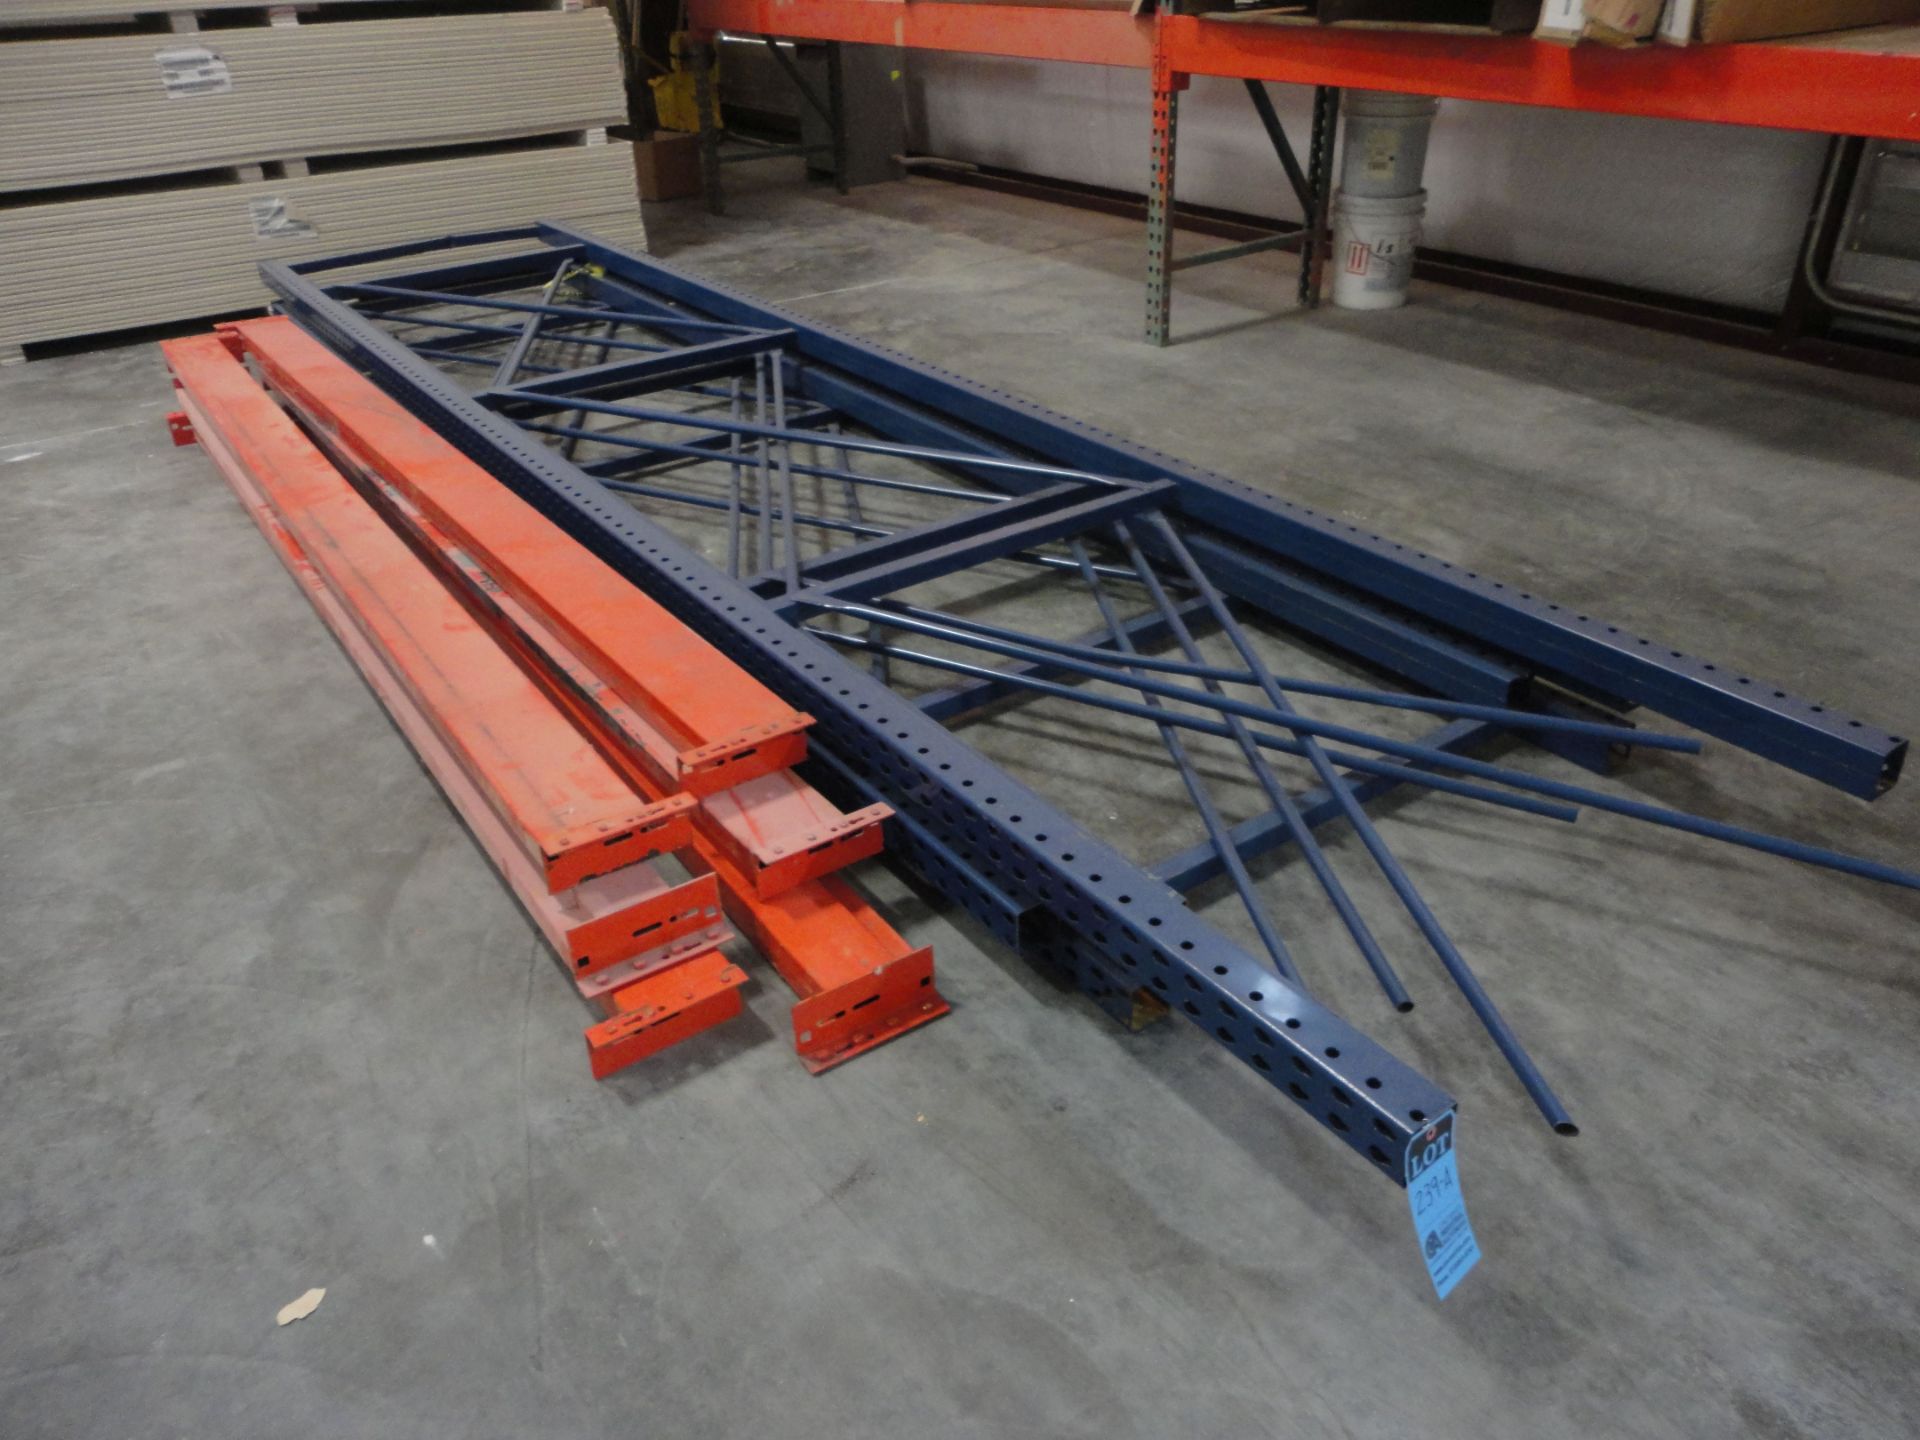 42" X 16' HIGH TEAR DROP STYLE PALLET RACK UPRIGHTS WITH (6) 6" FACE X 10' STEP CROSSMEMBERS